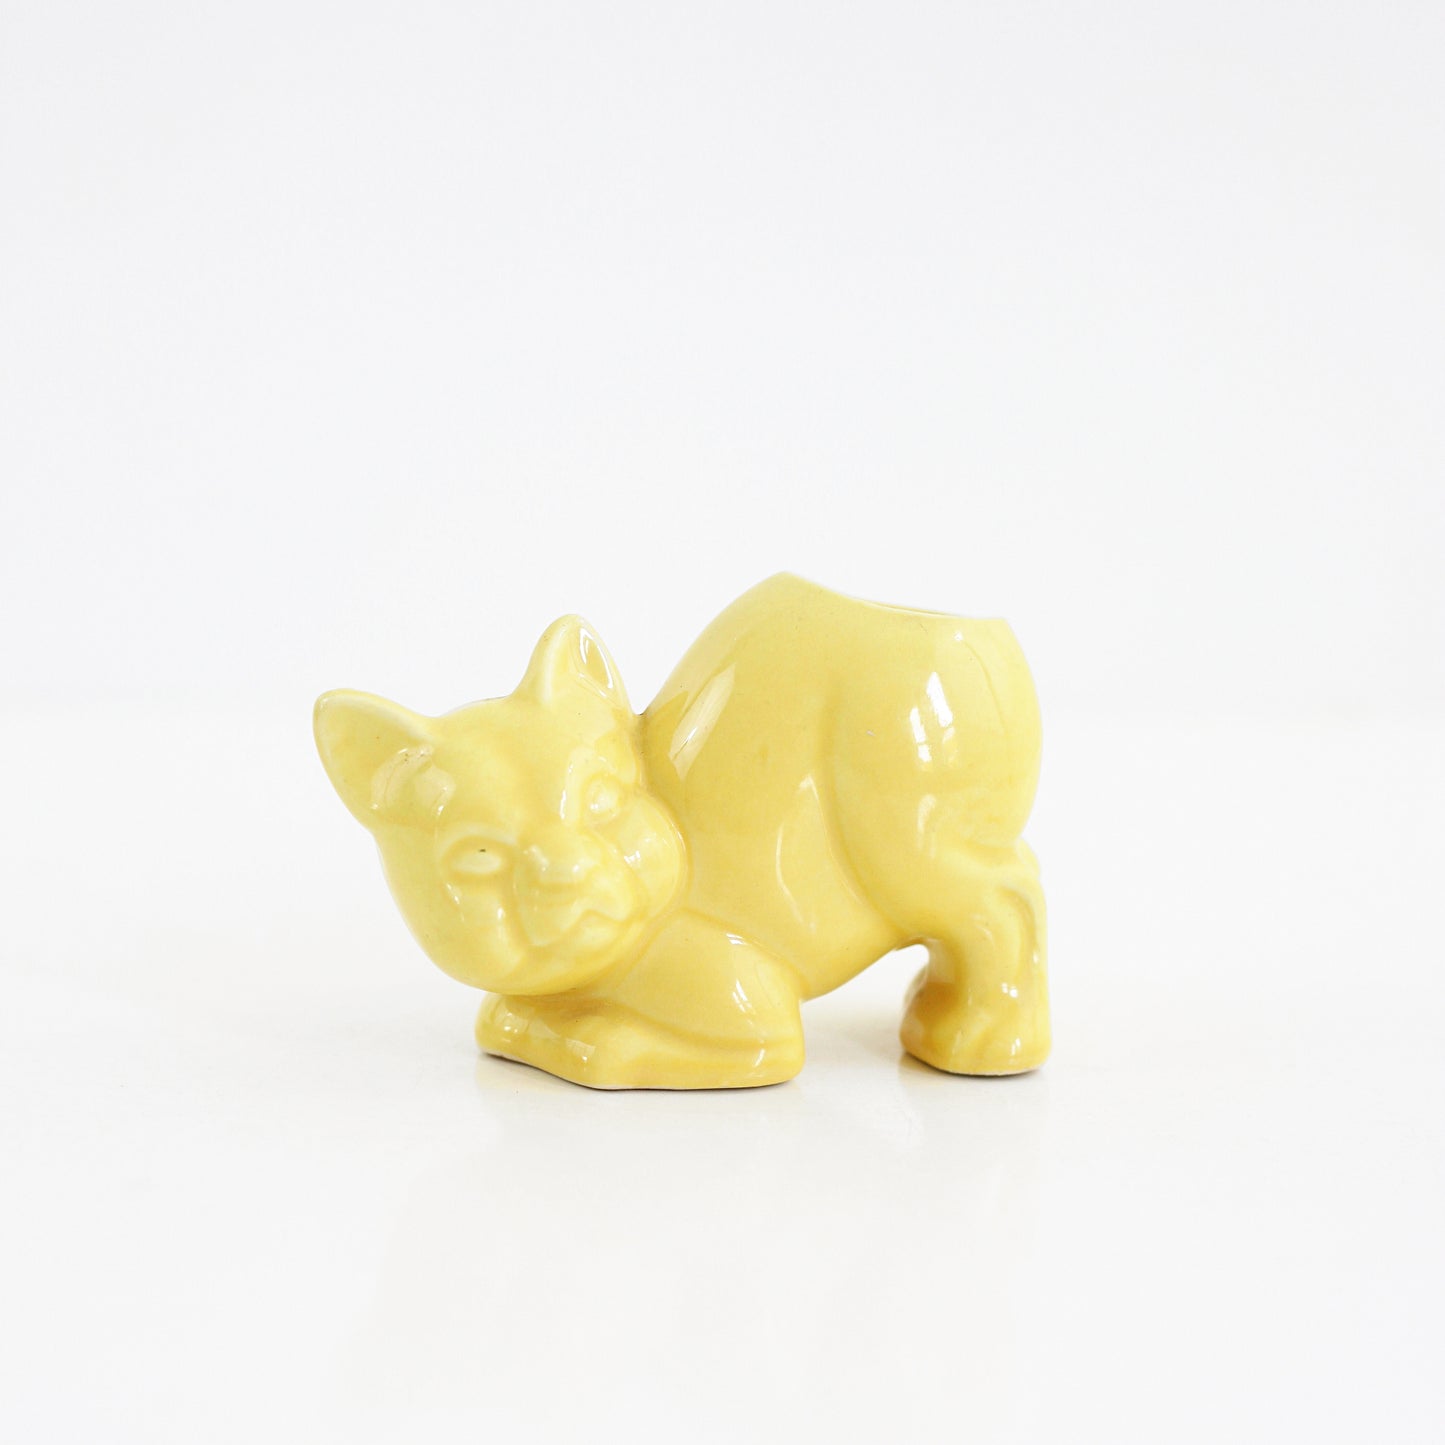 SOLD - 1940s Crouching Yellow Cat Planter by Morton Pottery